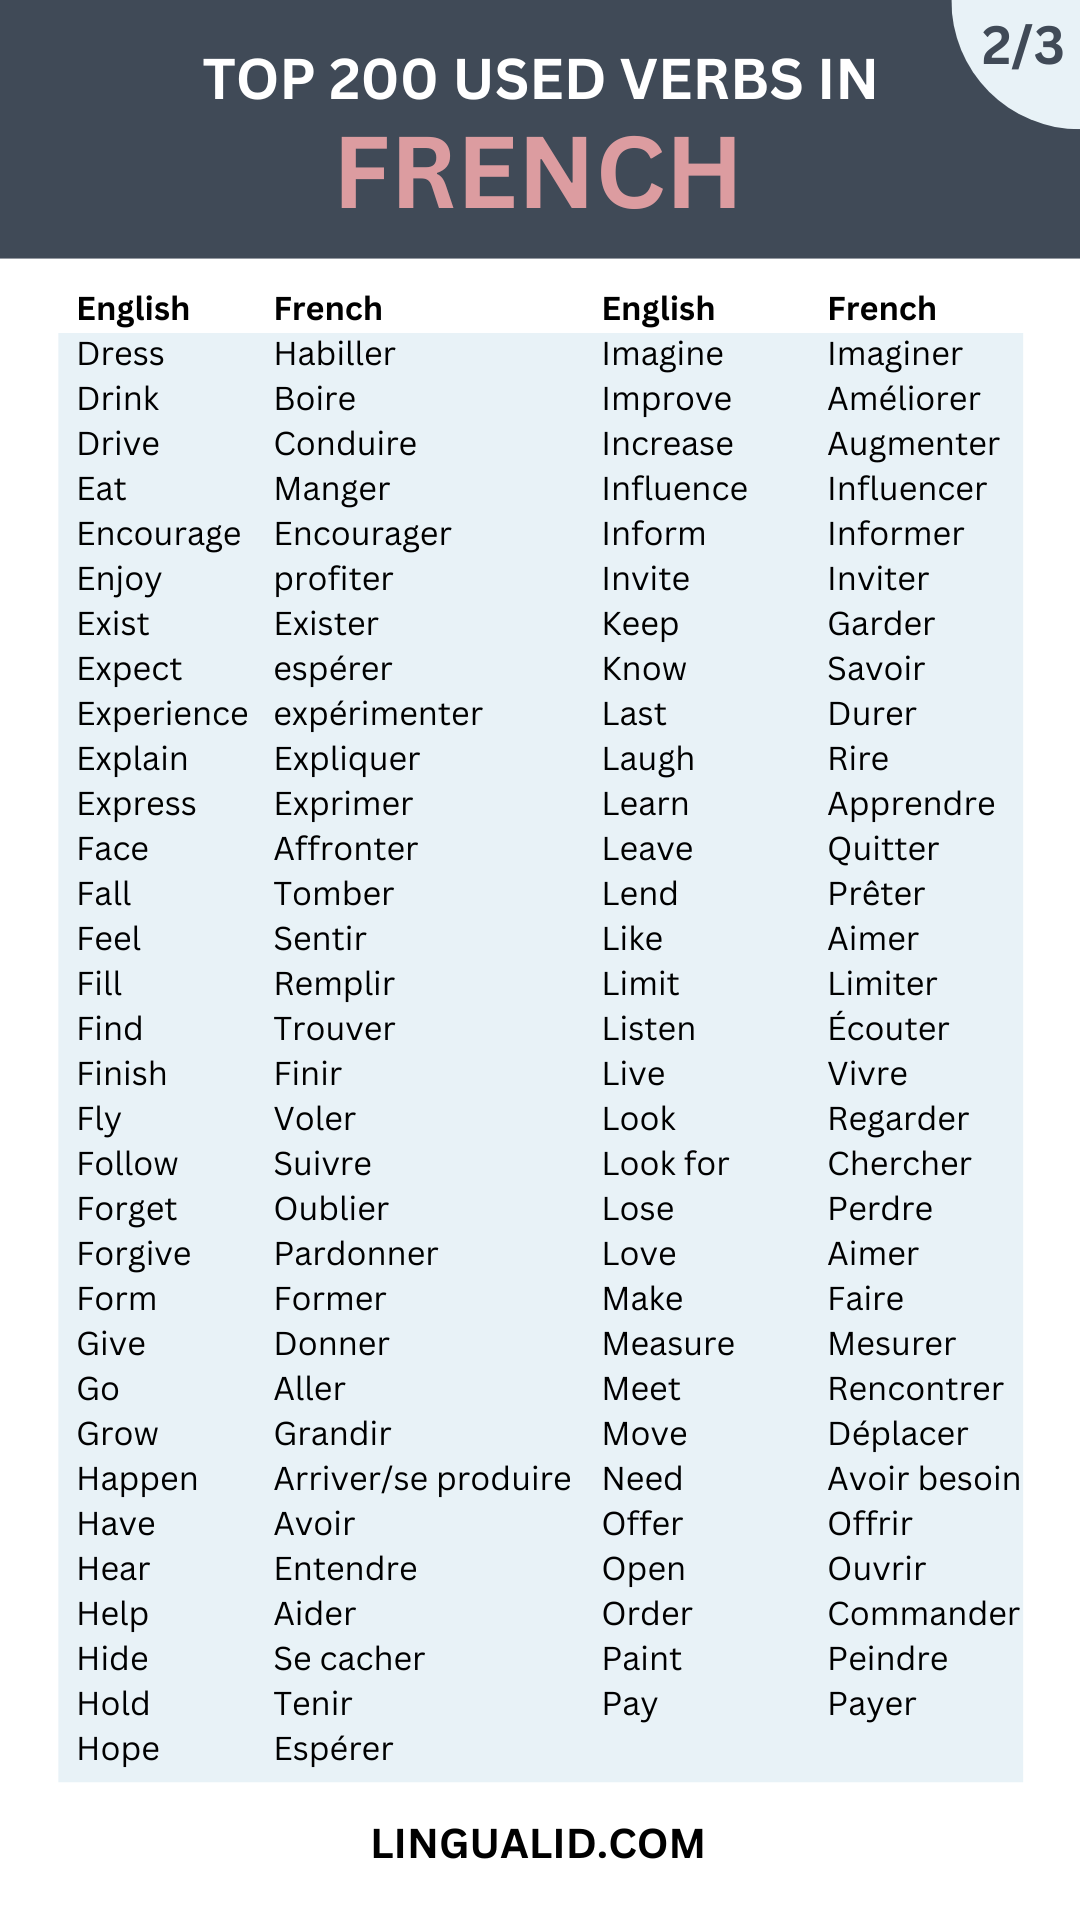 Top 200 Common Verbs In French 2